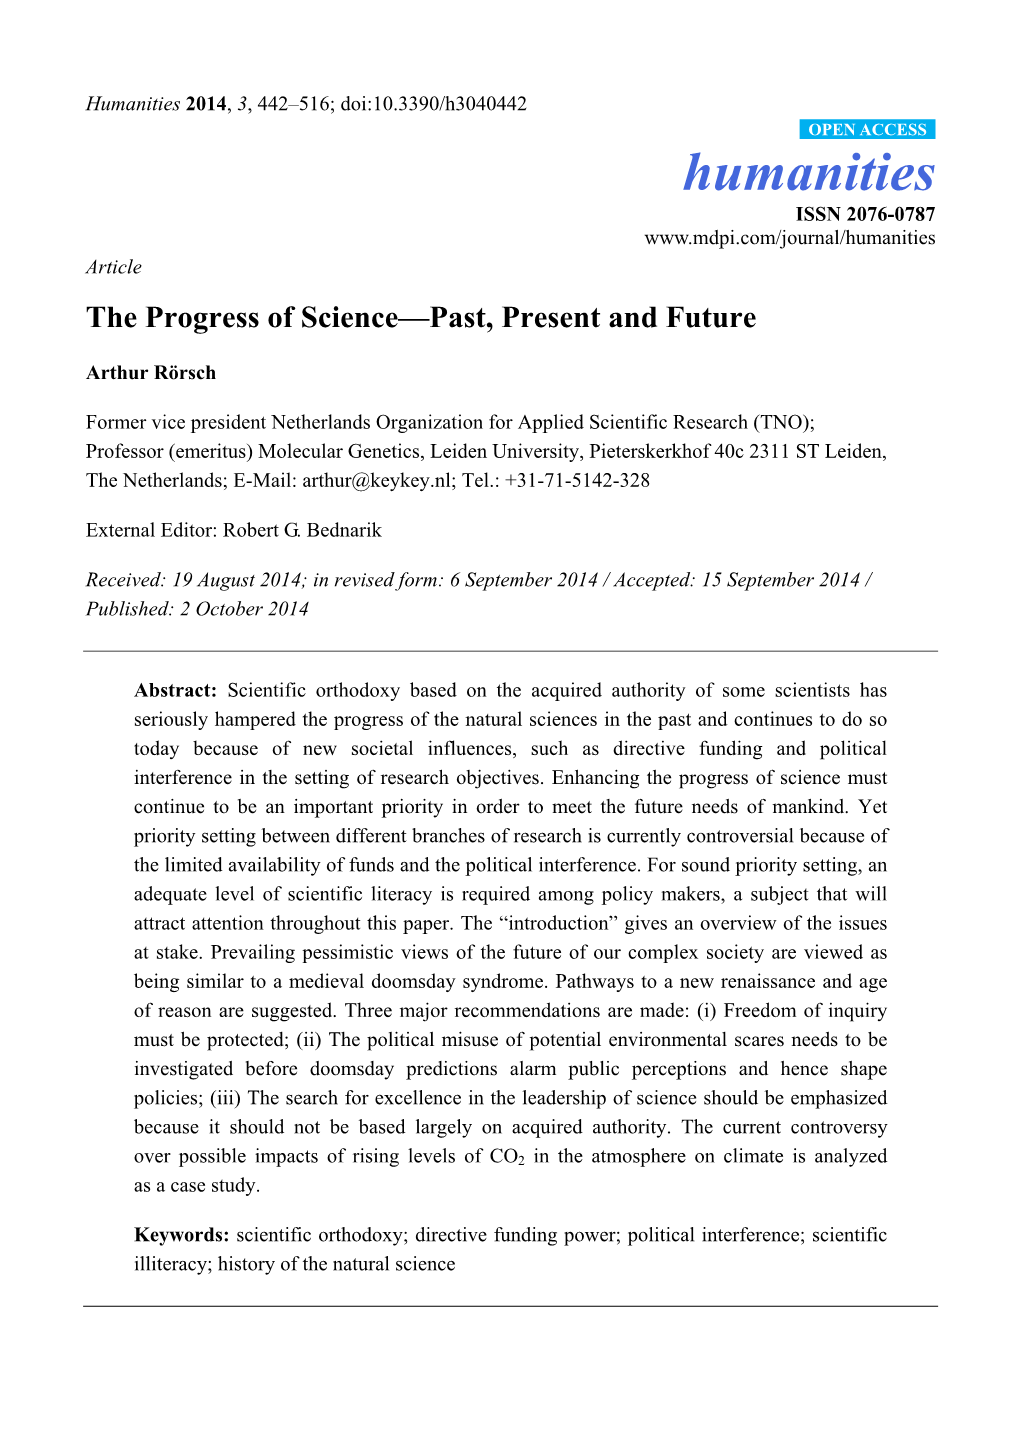 The Progress of Science—Past, Present and Future